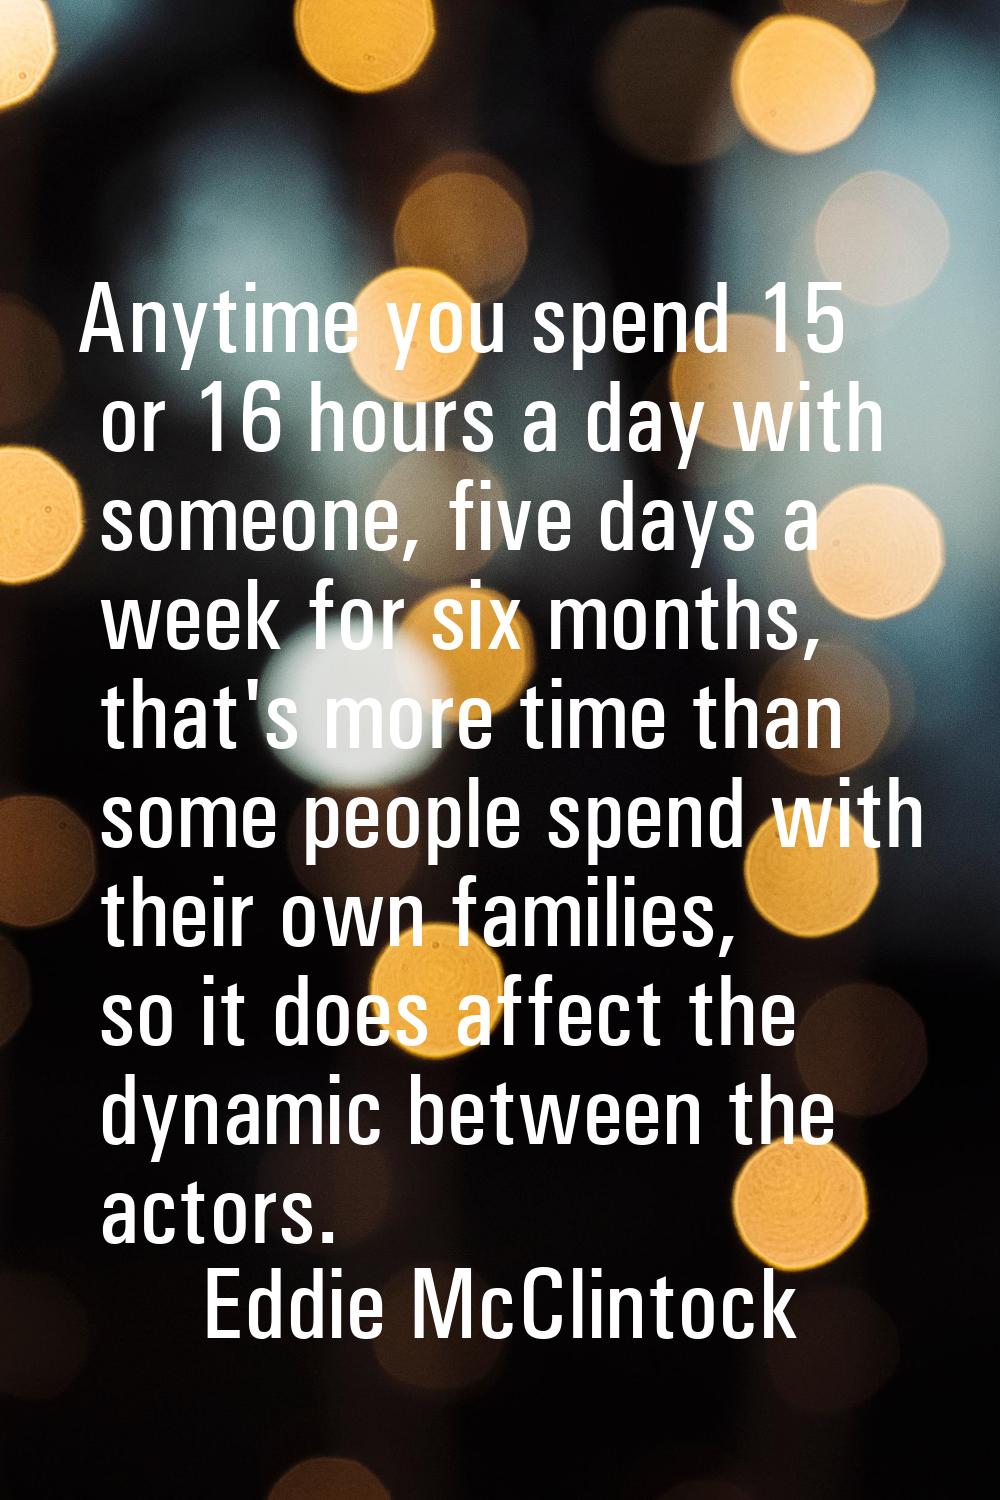 Anytime you spend 15 or 16 hours a day with someone, five days a week for six months, that's more t